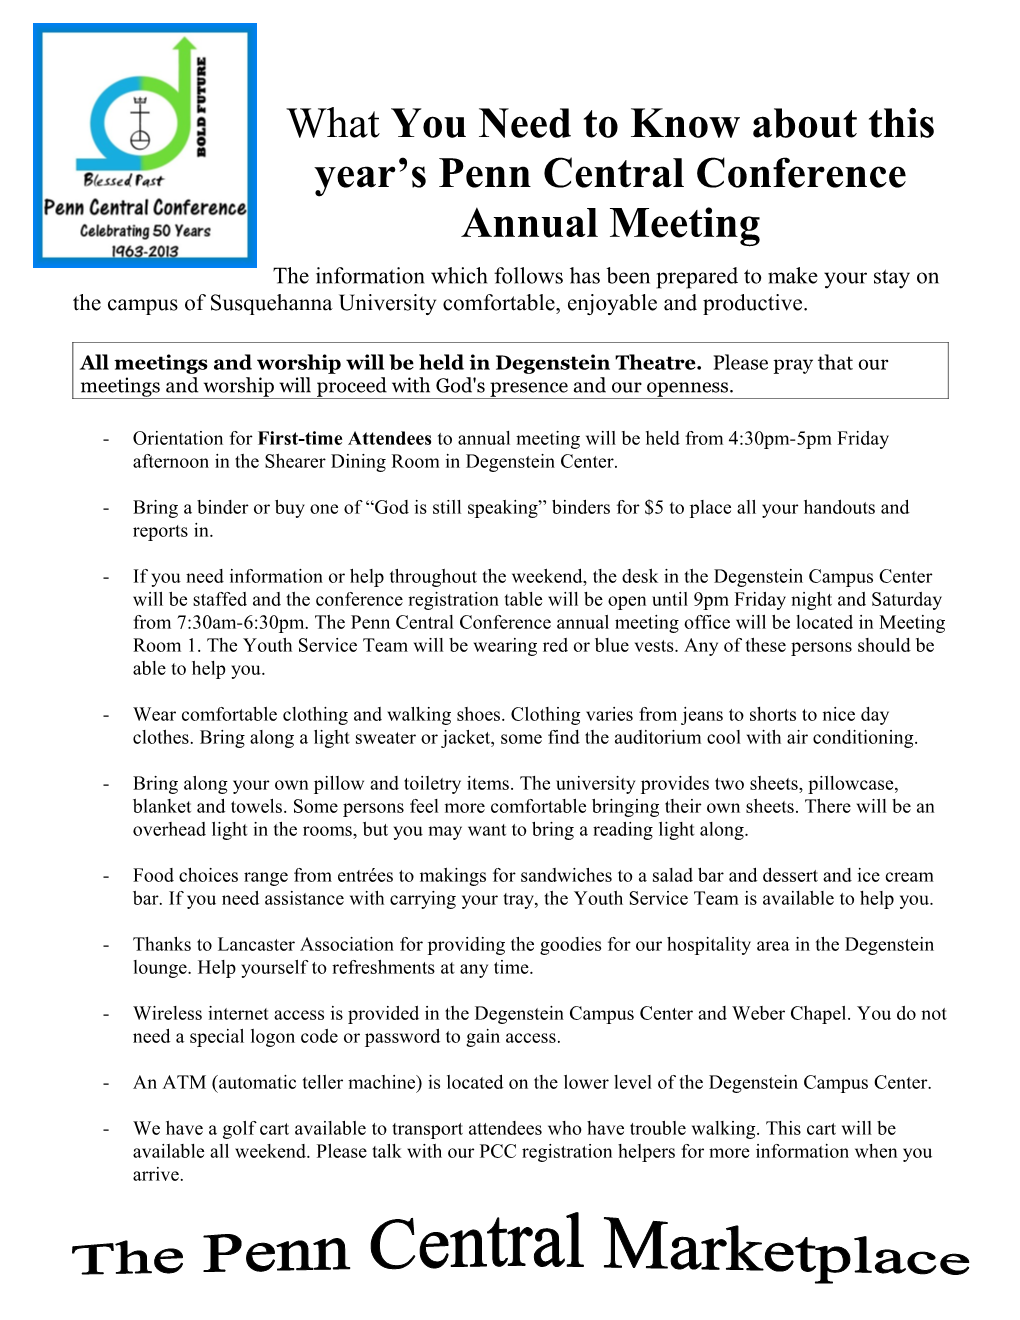 What You Need to Know About This Year S Penn Central Conference Annual Meeting